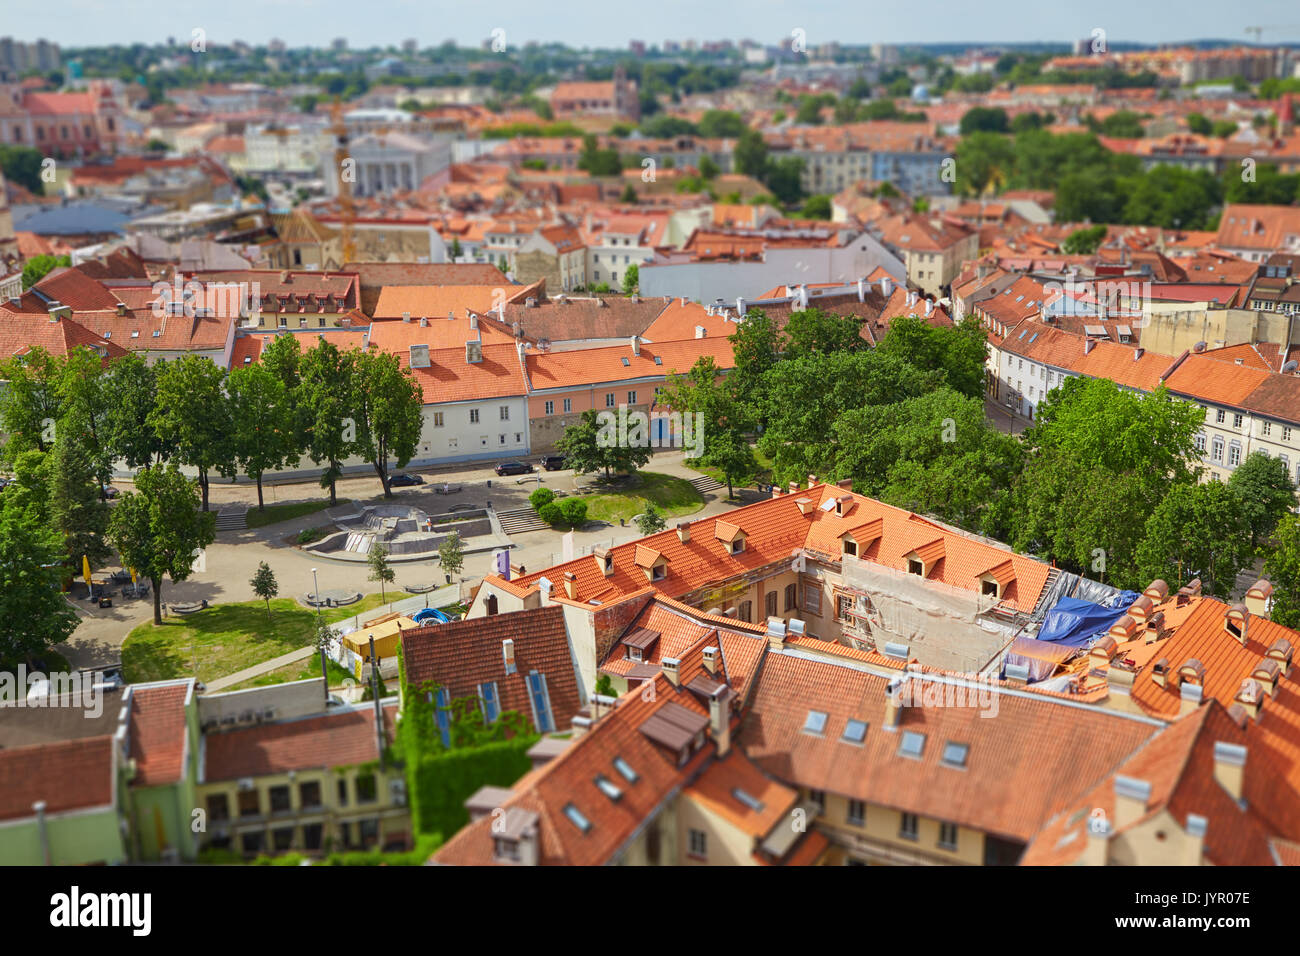 A view from above of the old city of Vilnius with tilt shift lens effect Stock Photo